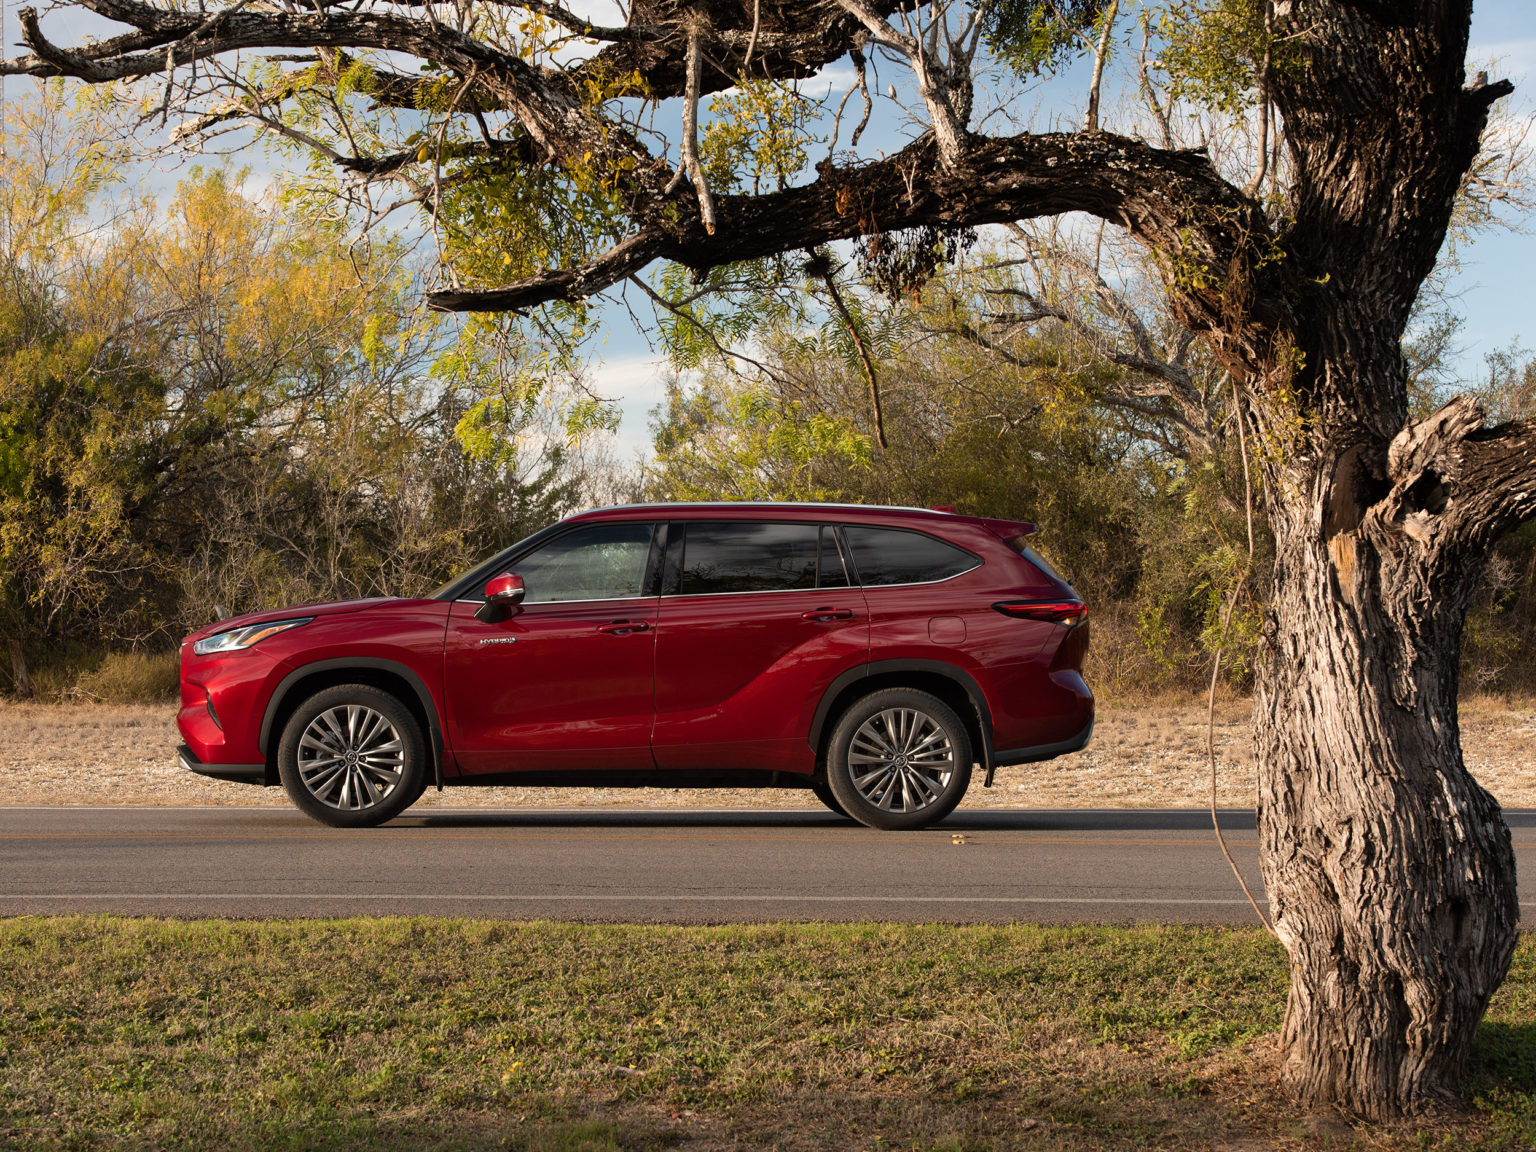 The Toyota Highlander Hybrid has been completely redesigned for the 2020 model year.